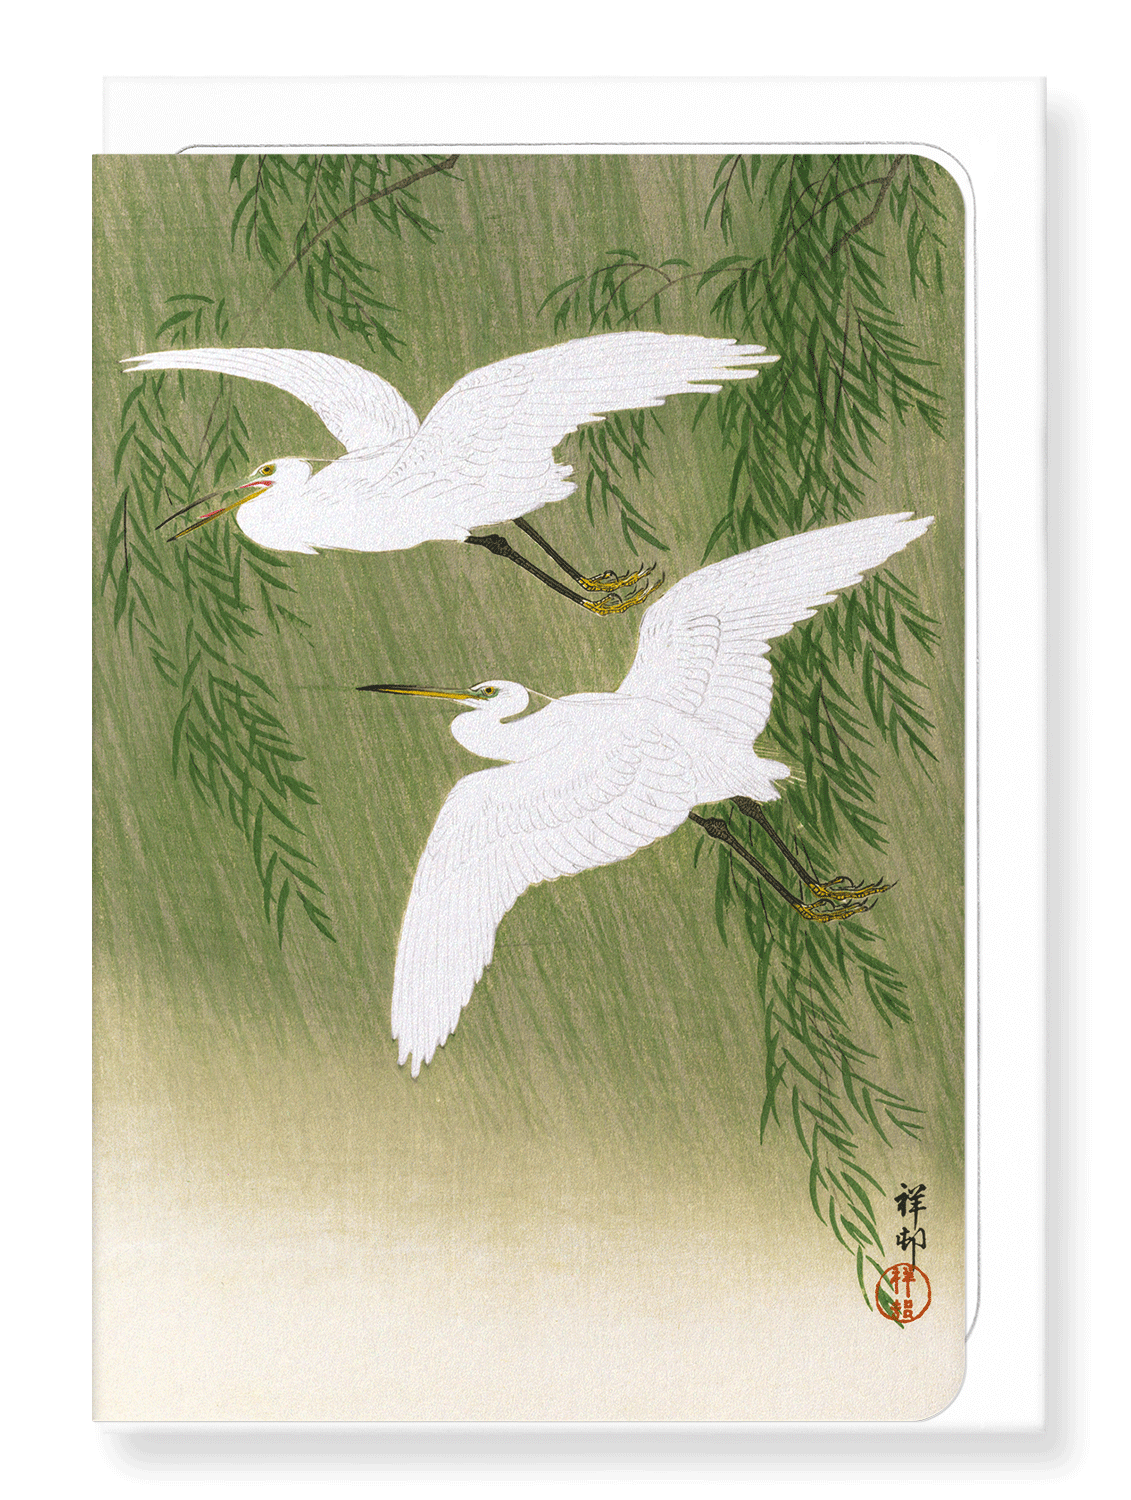 Ezen Designs - Egrets and willow - Greeting Card - Front